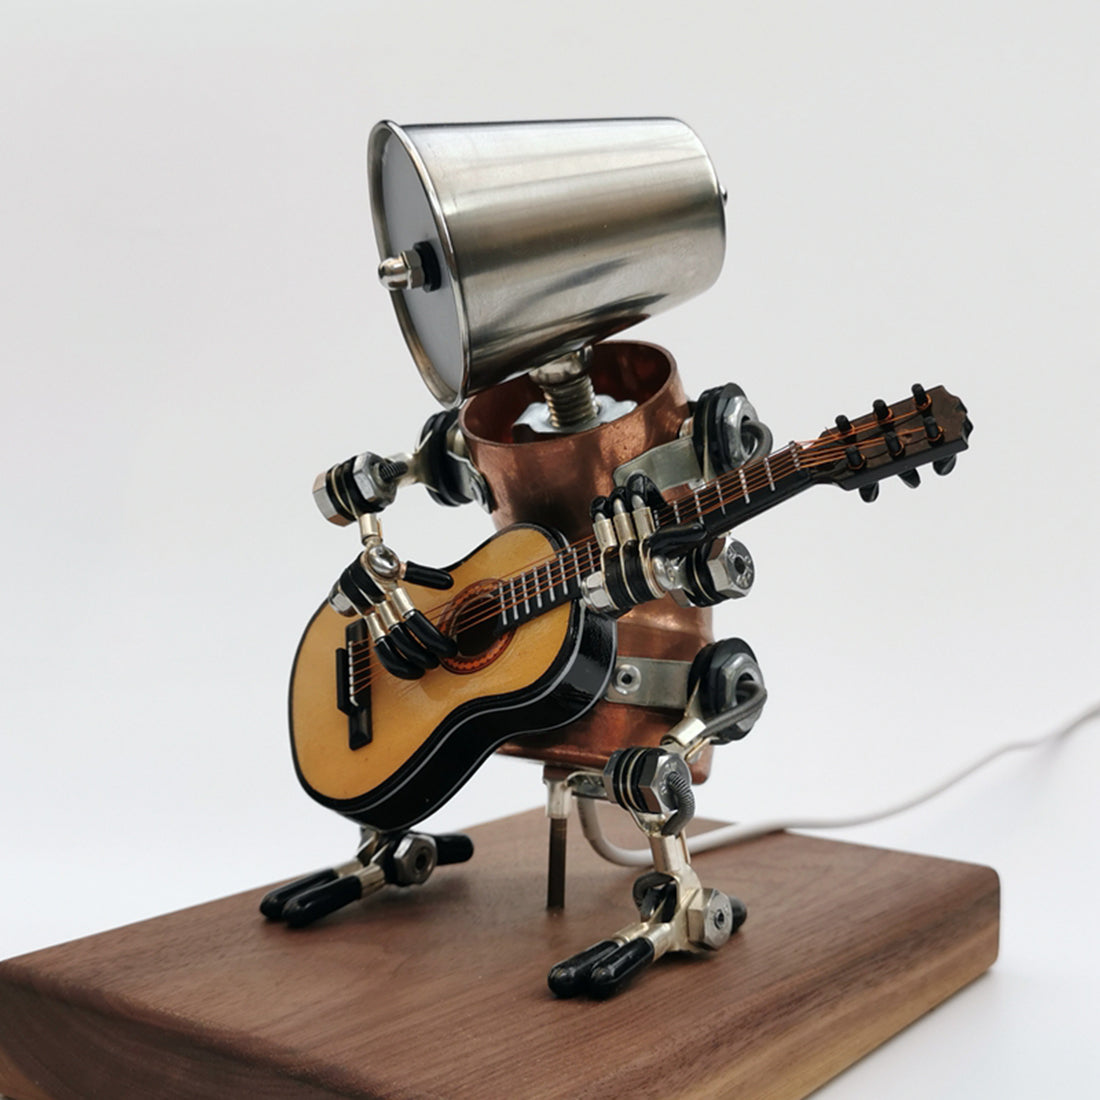 Steampunk Style Assembled 3D Metal Musician Bassists Model Lamp 2-IN-1Desk Decor  Crafts